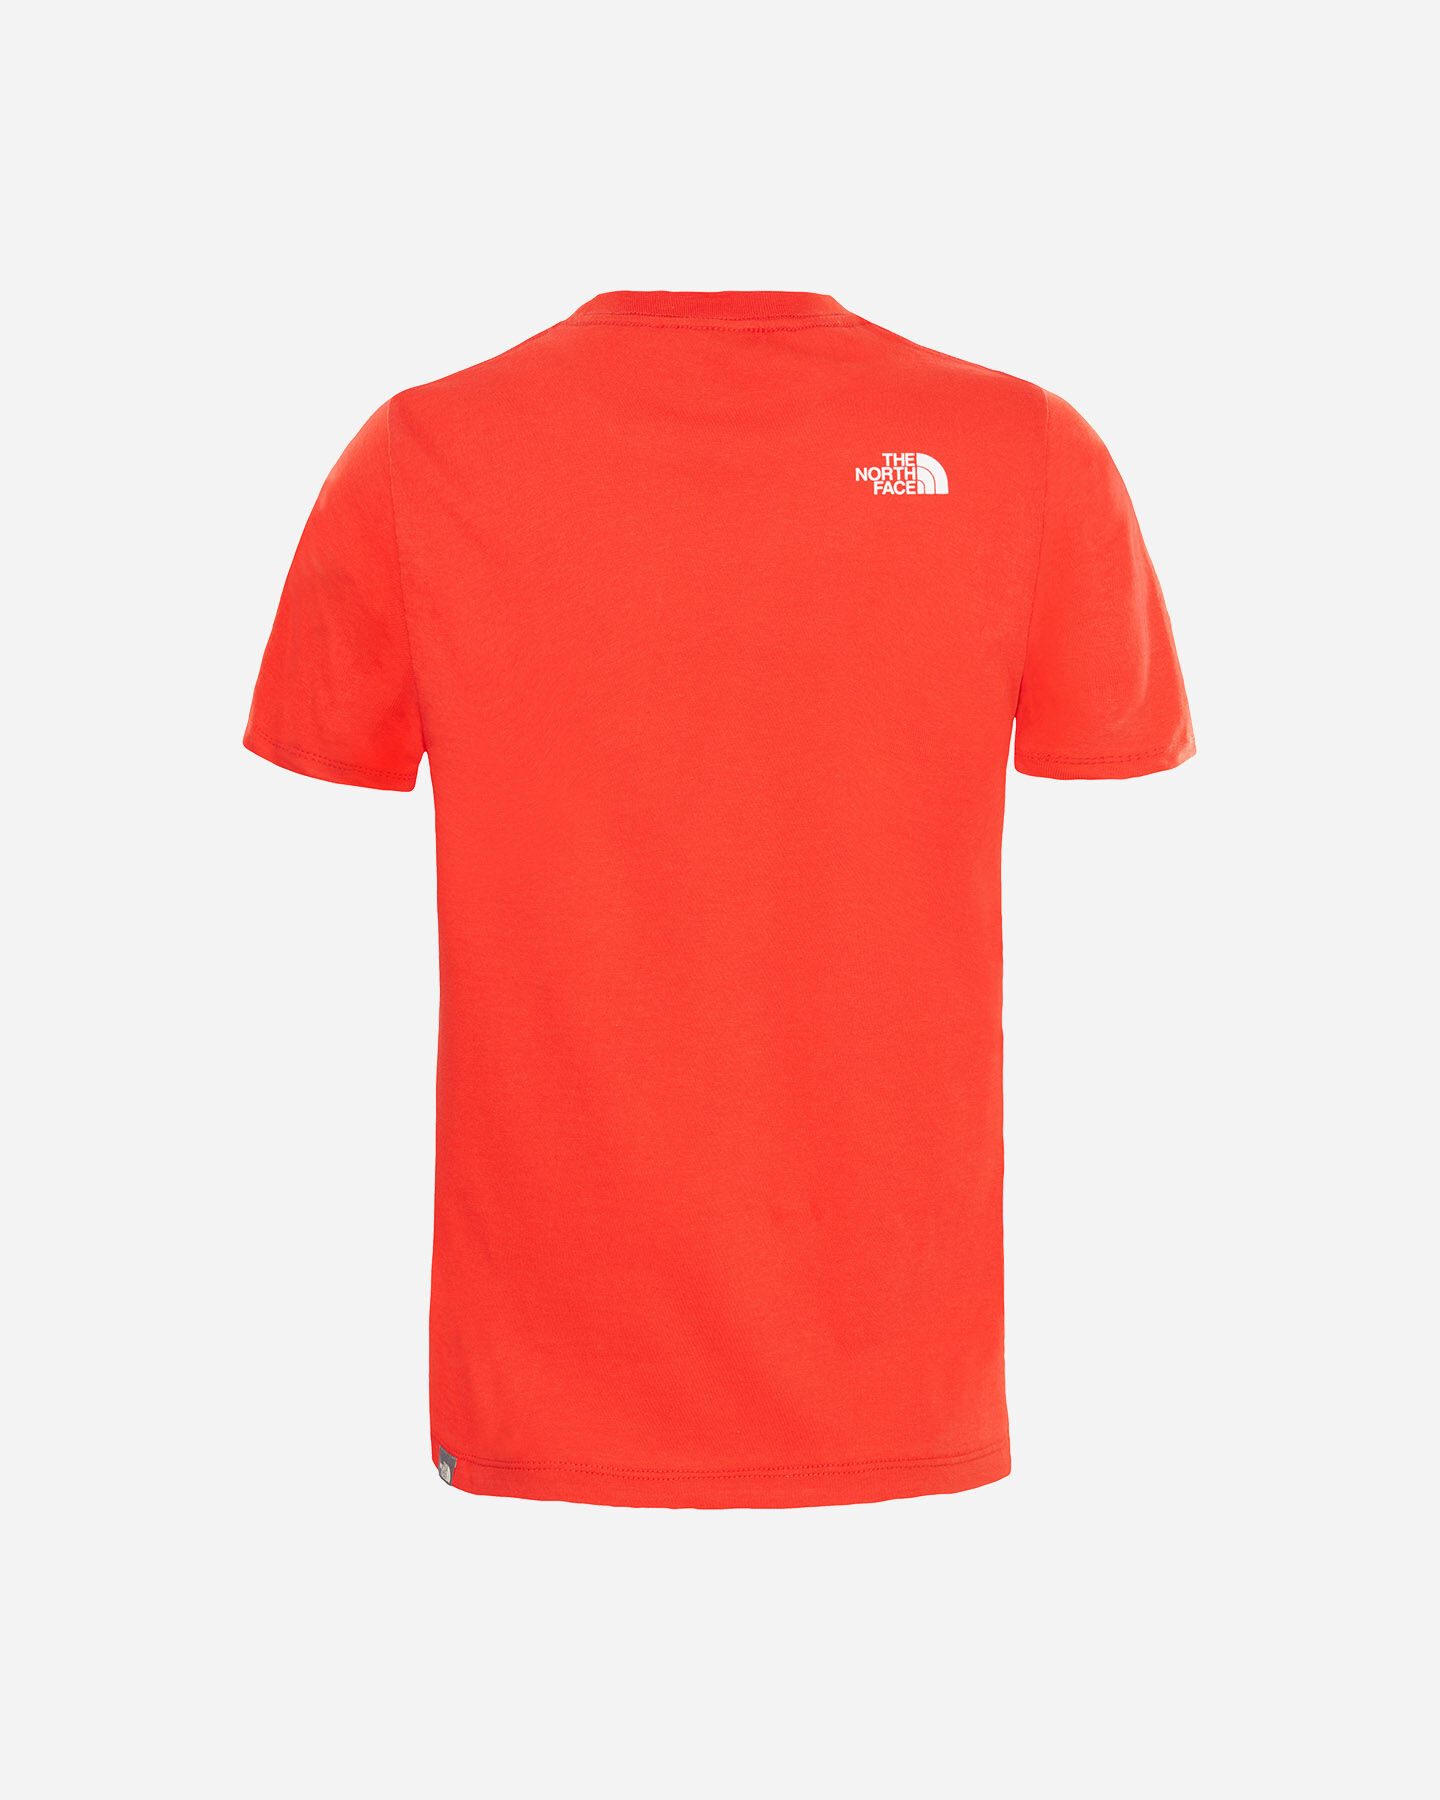  T-Shirt THE NORTH FACE EASY JR S5017303|M6J|XS scatto 1